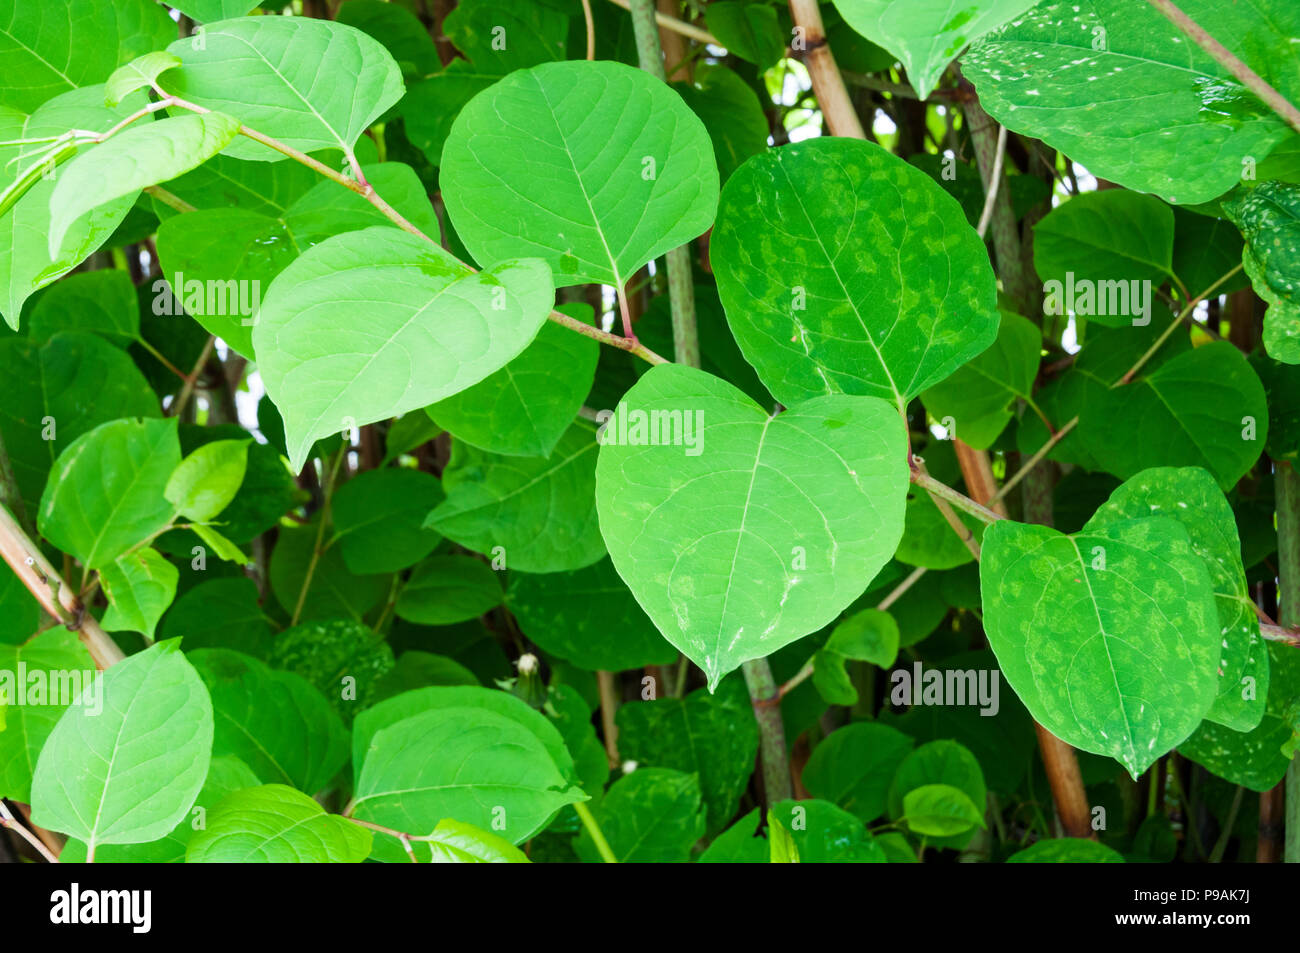 Japanese knotweed, Fallopia japonica Stock Photo